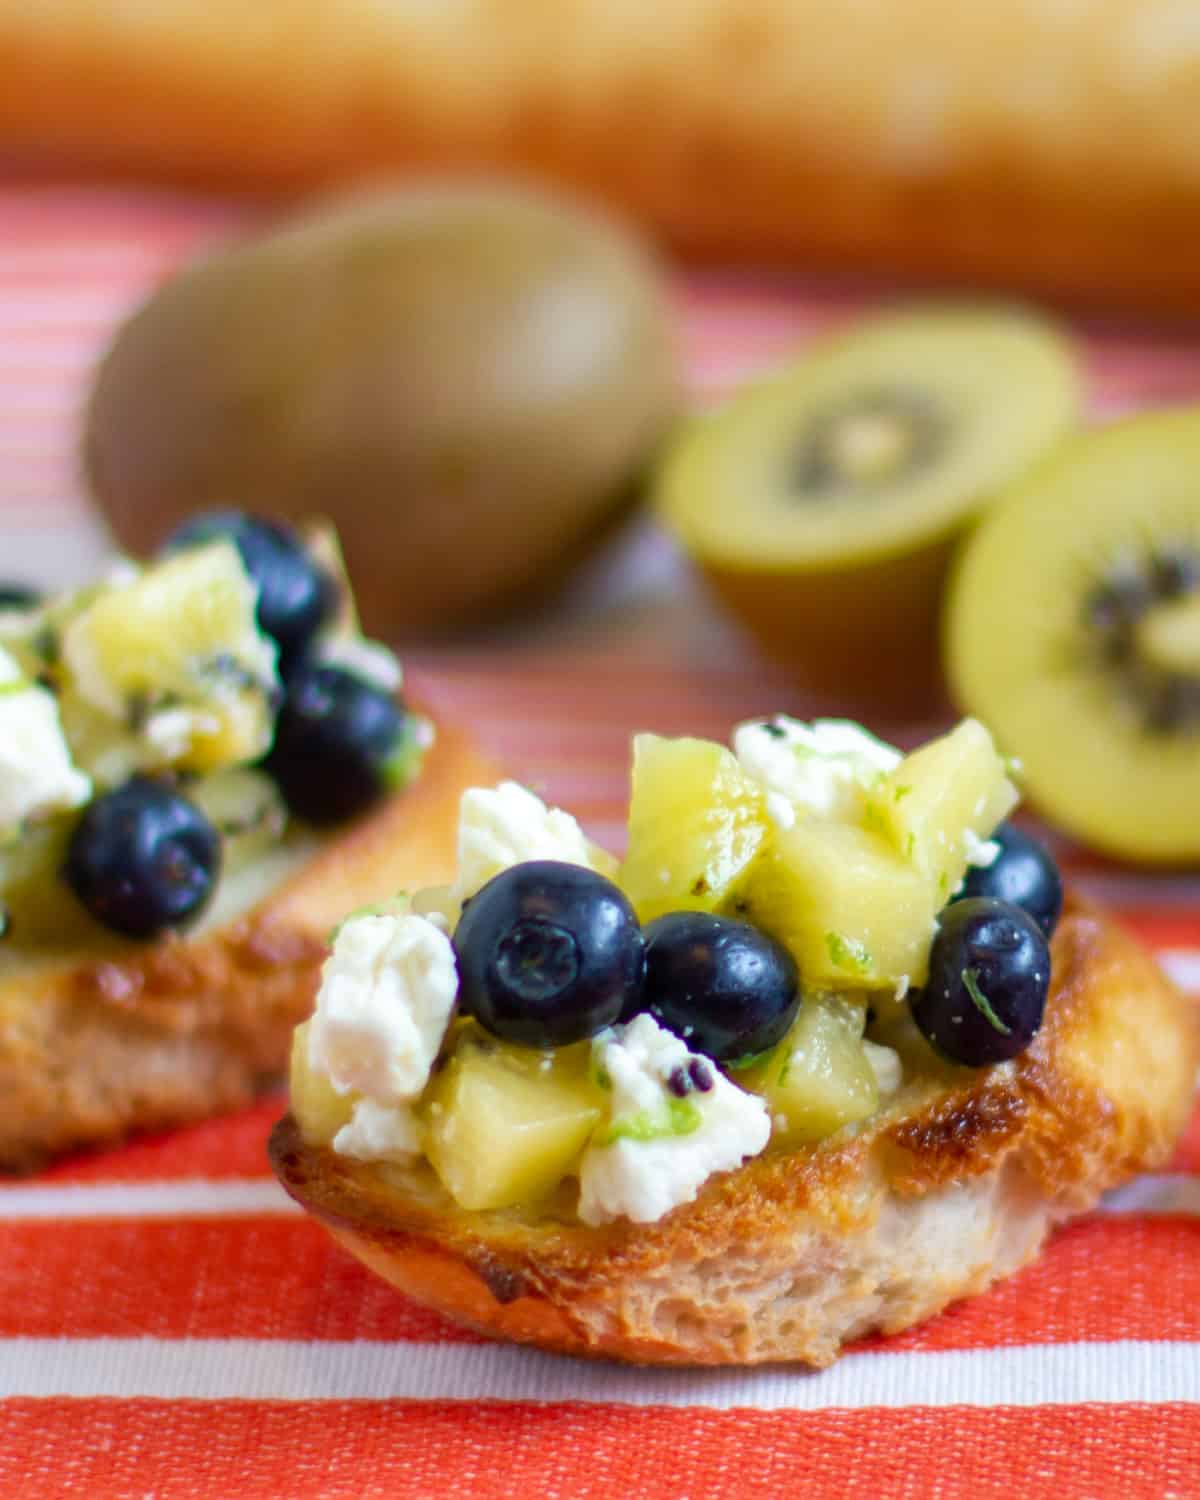 Image of bruschetta with sliced kiwi in the background.